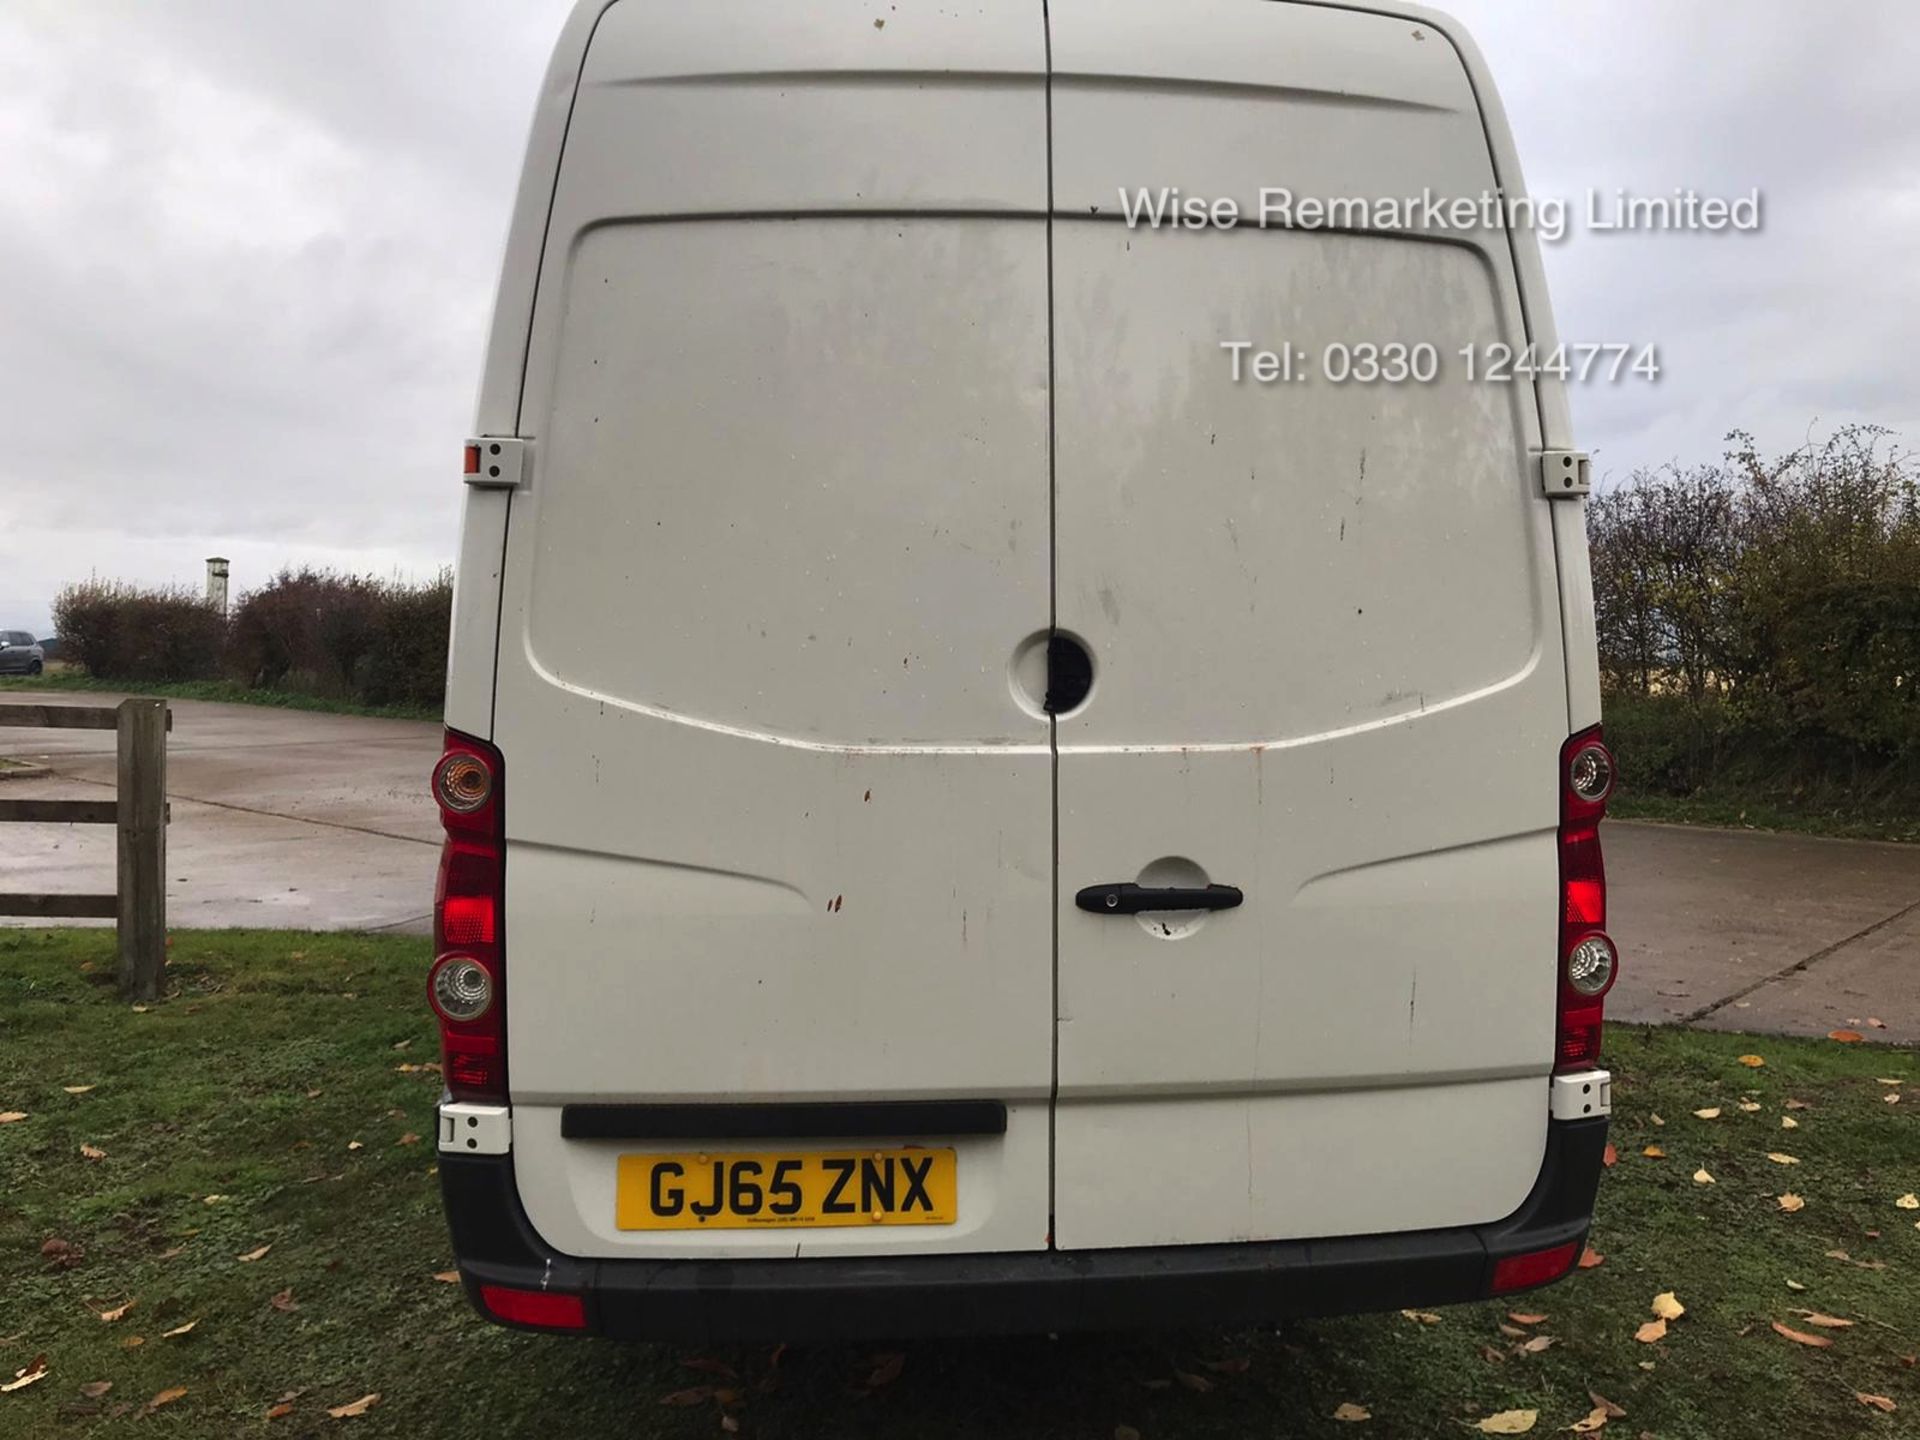 Volkswagen Crafter CR35 Startline 2.0l TDi - LWB - 2016 Model - 1 Keeper From New - Service History - Image 4 of 15